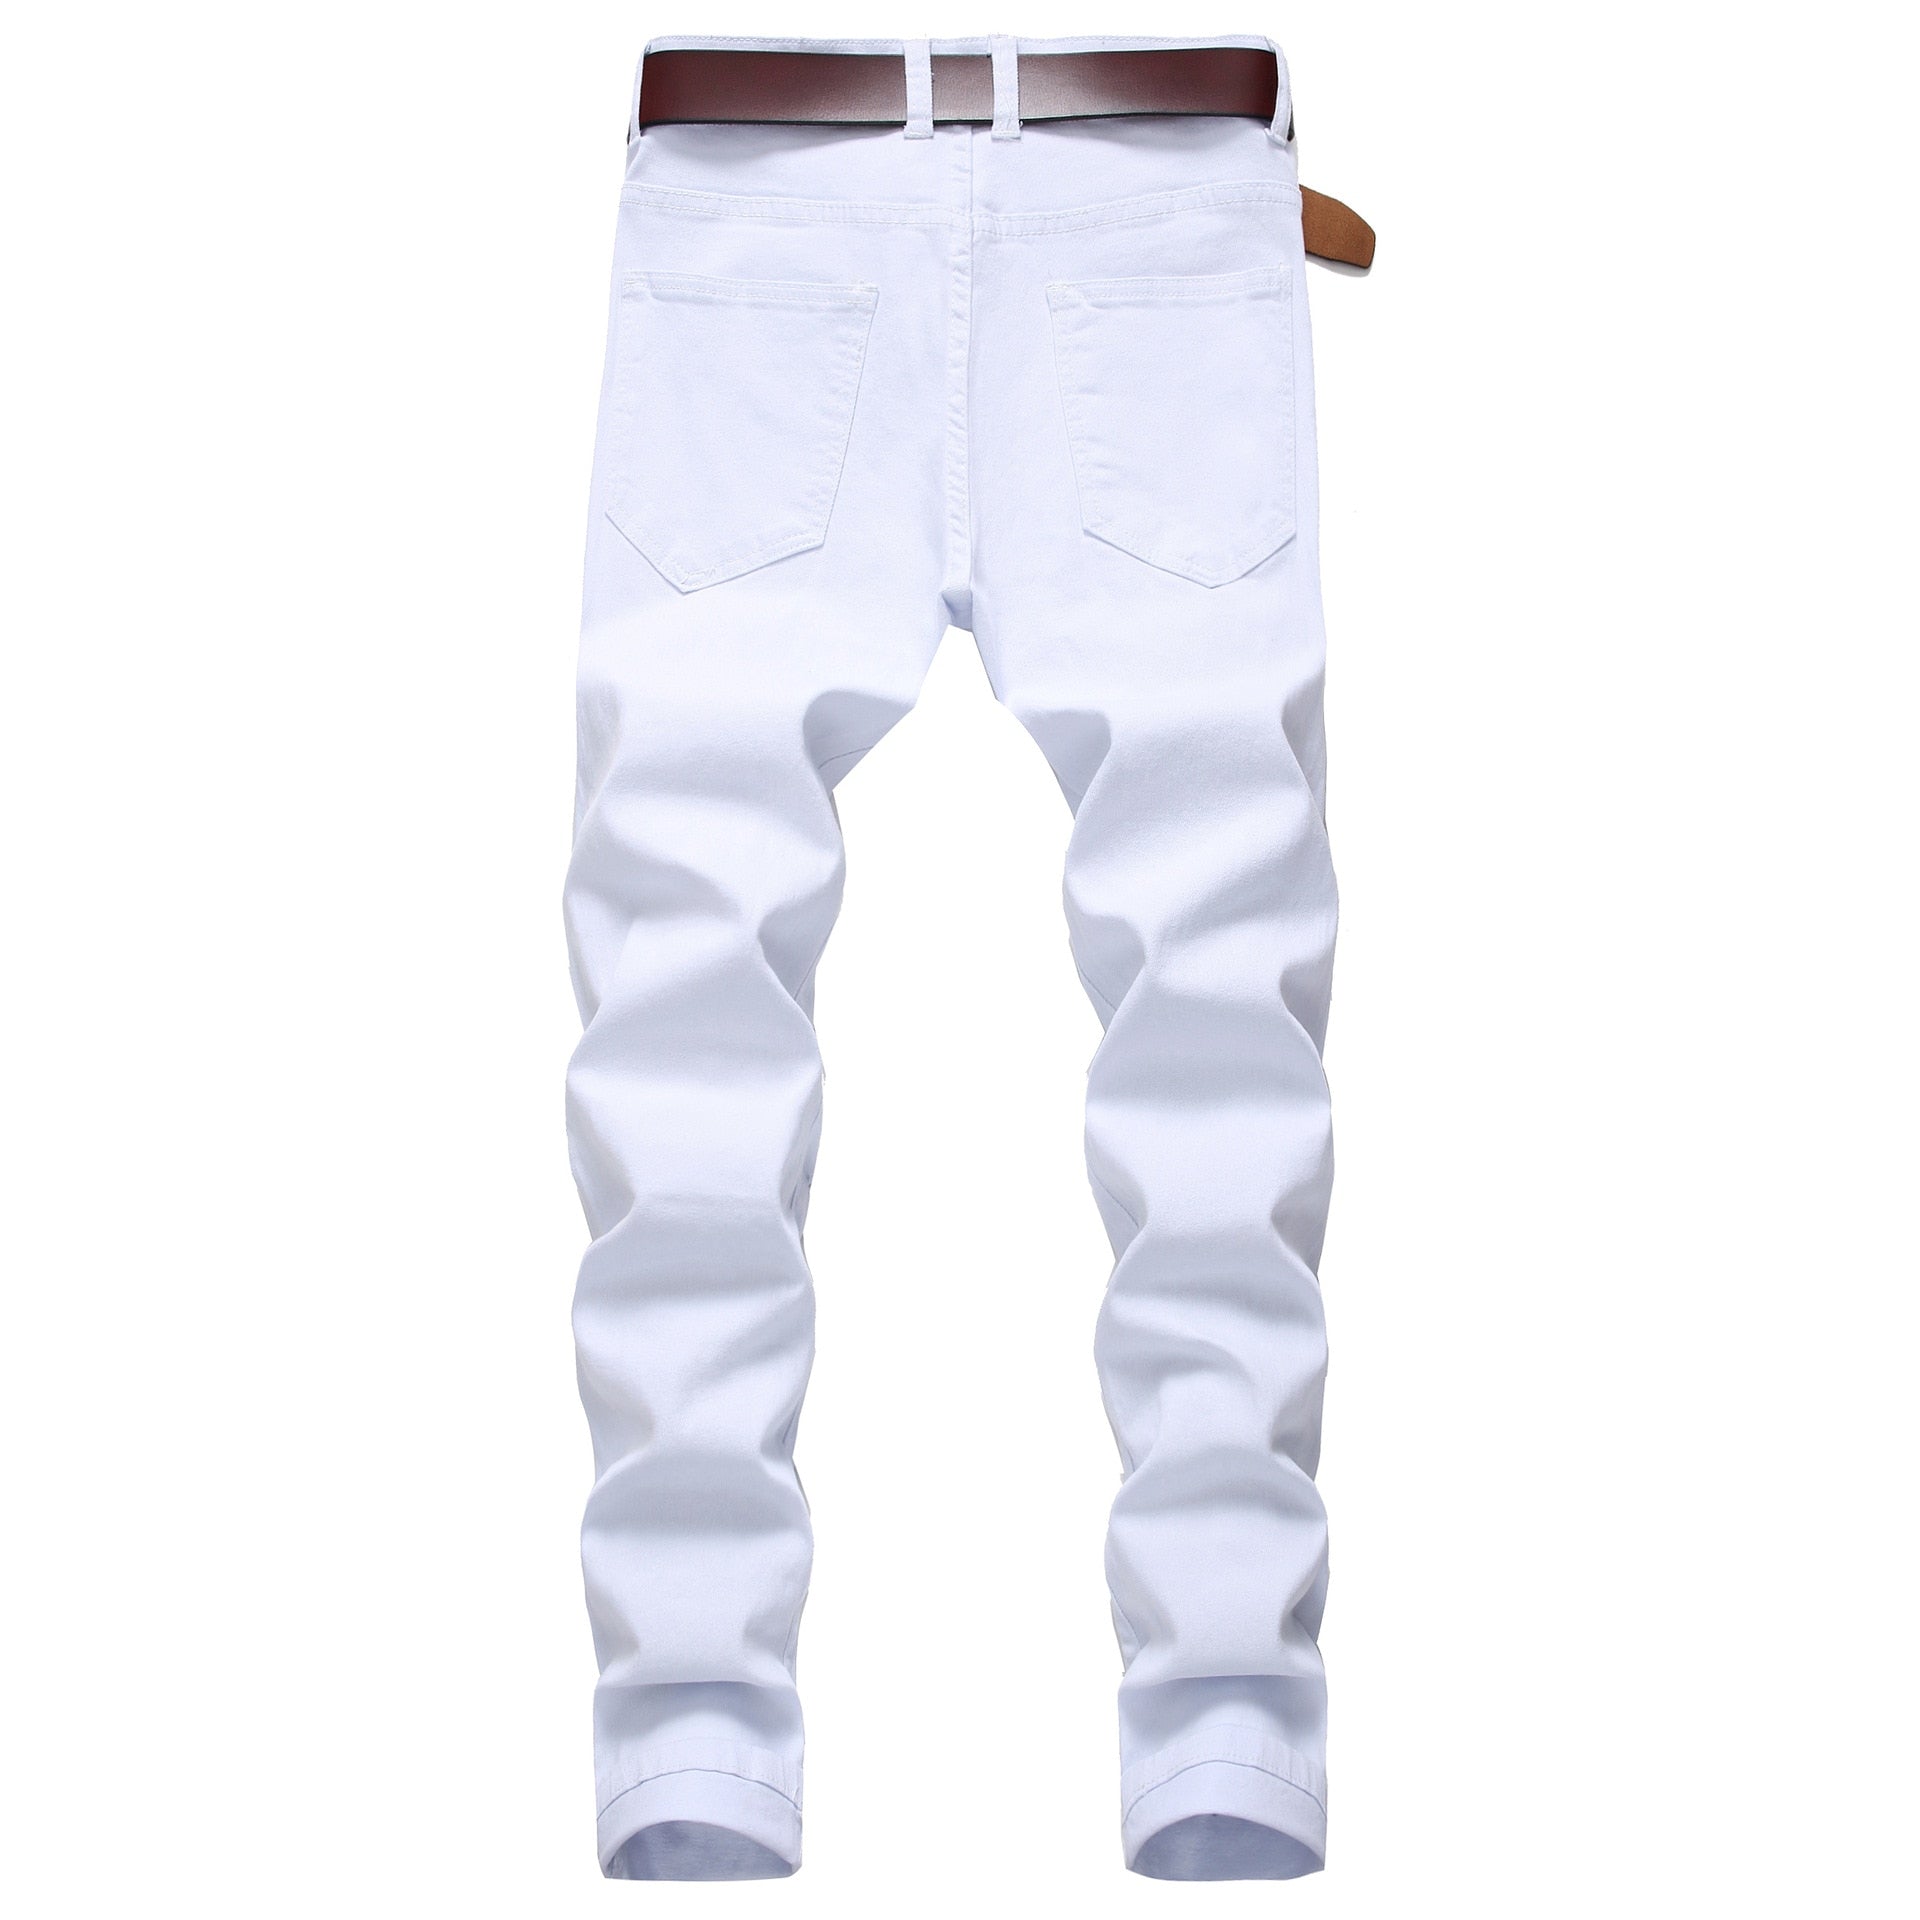 New Arrival Men Cotton Ripped Hole Jeans Casual Slim Skinny White Jeans